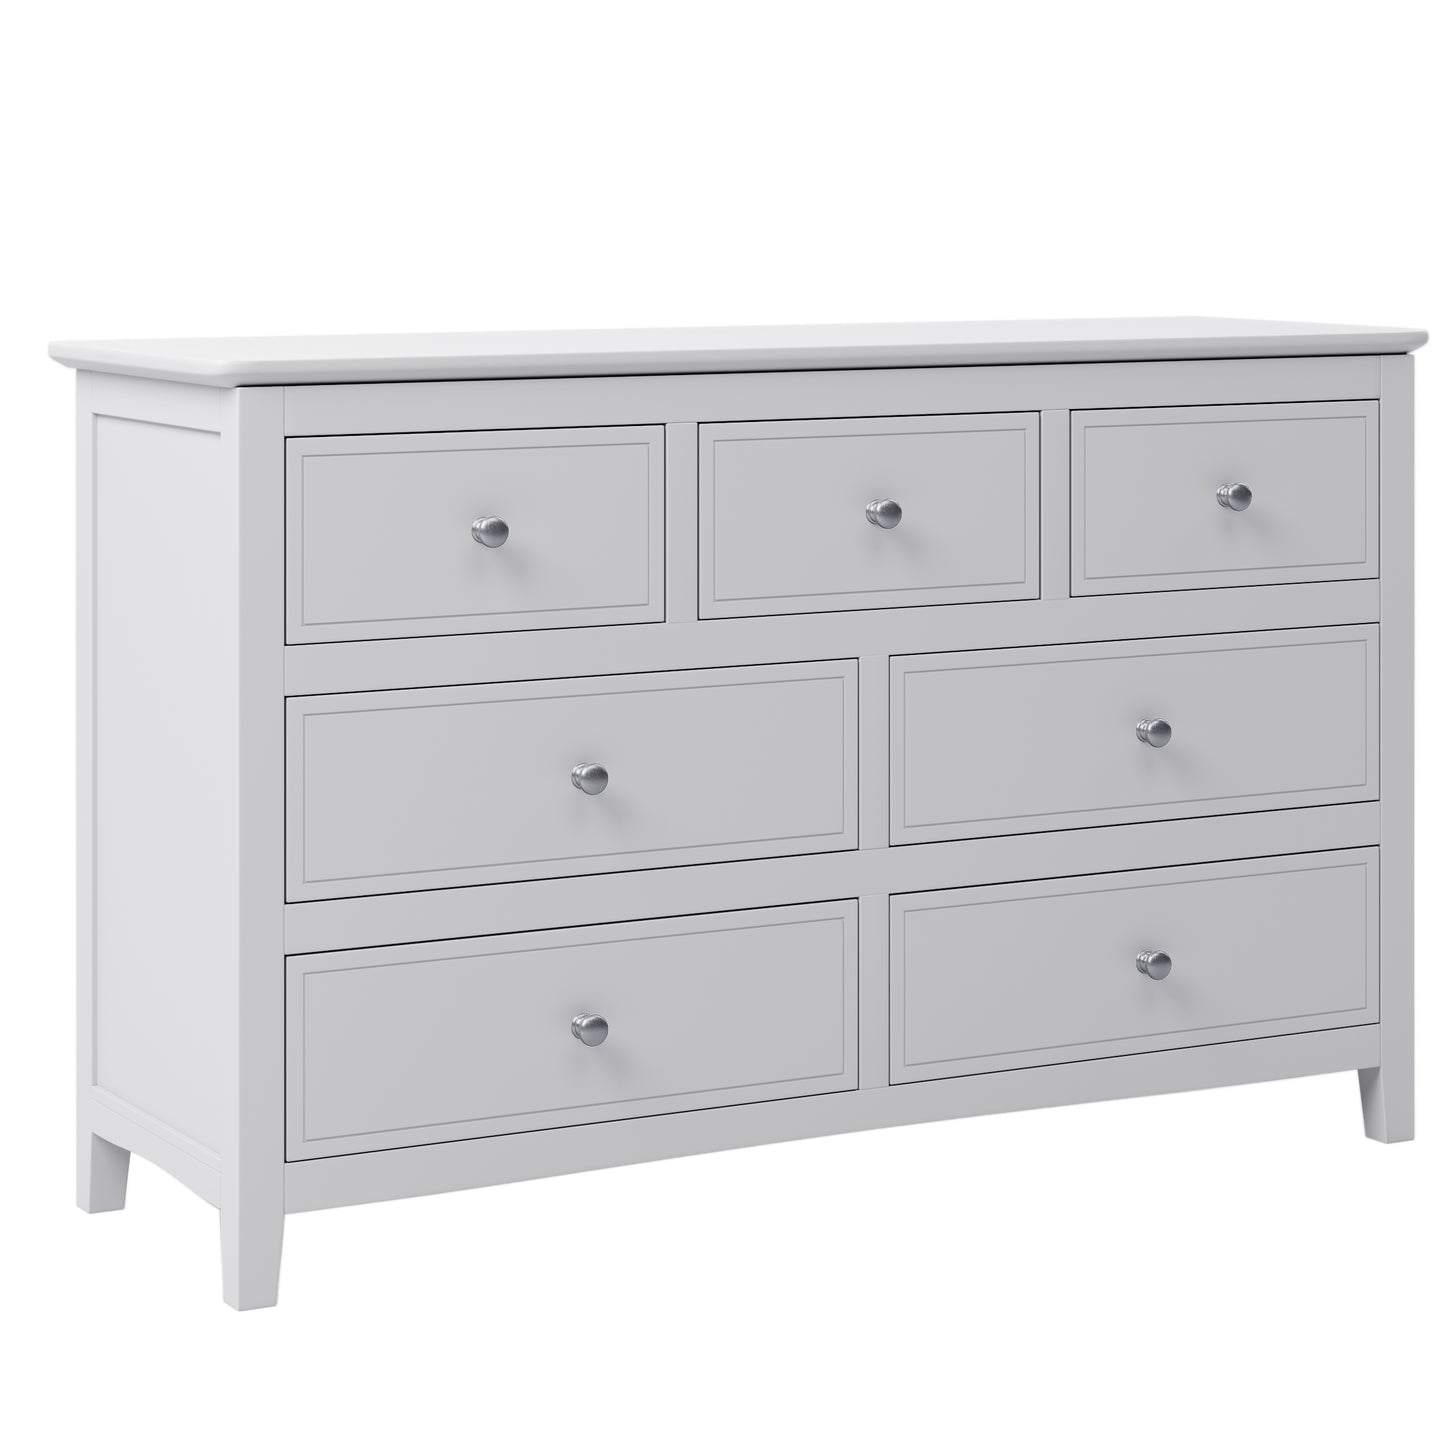 7 Drawers Solid Wood Dresser in White